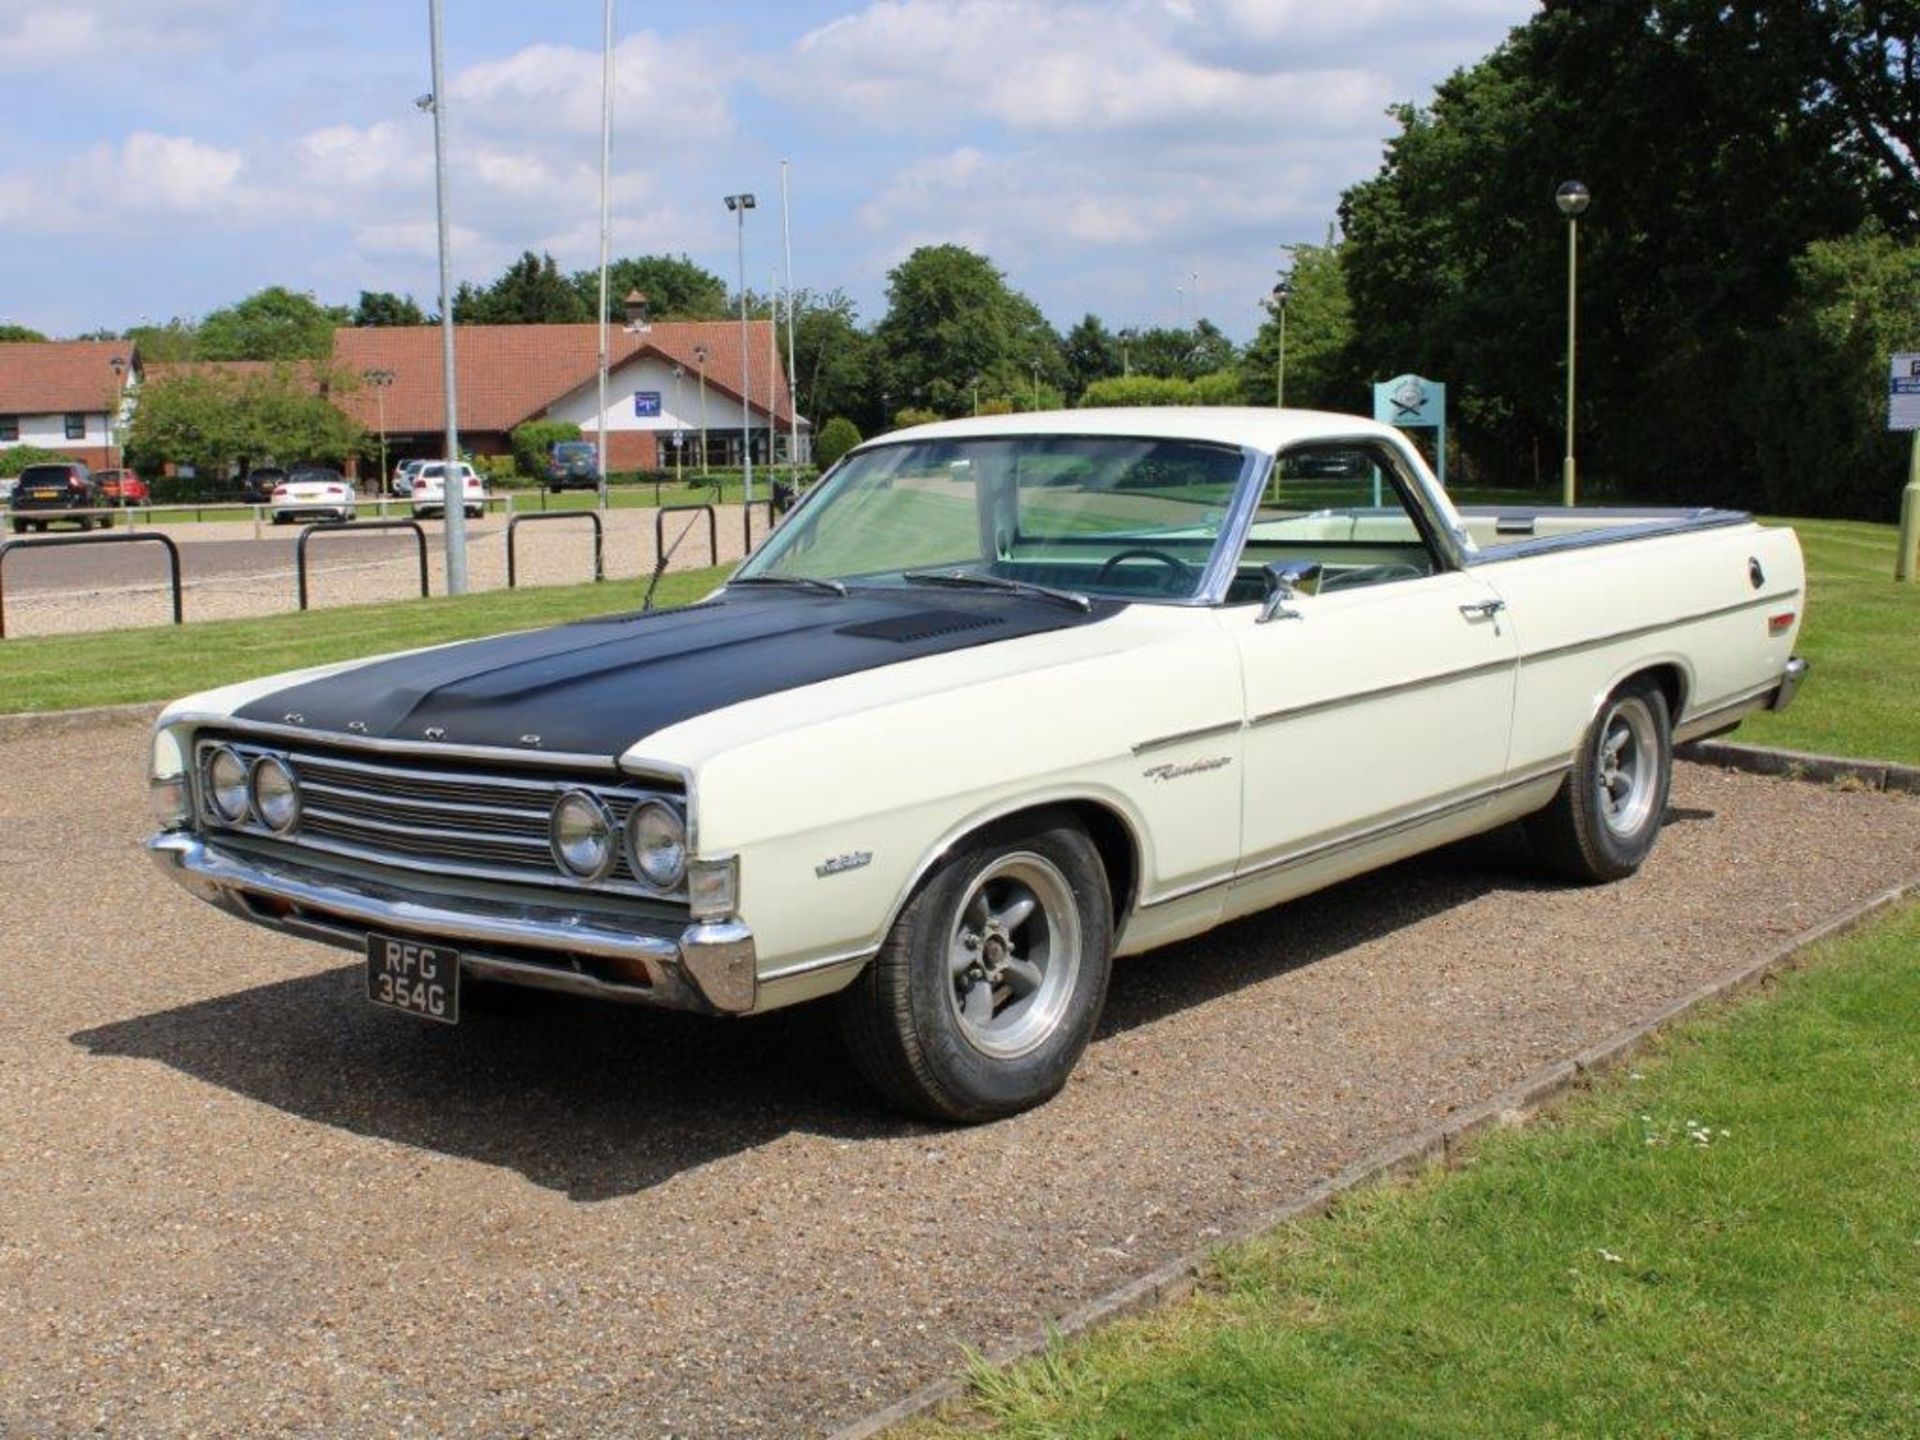 1969 Ford Ranchero 5.8 V8 Auto LHD - Image 3 of 25